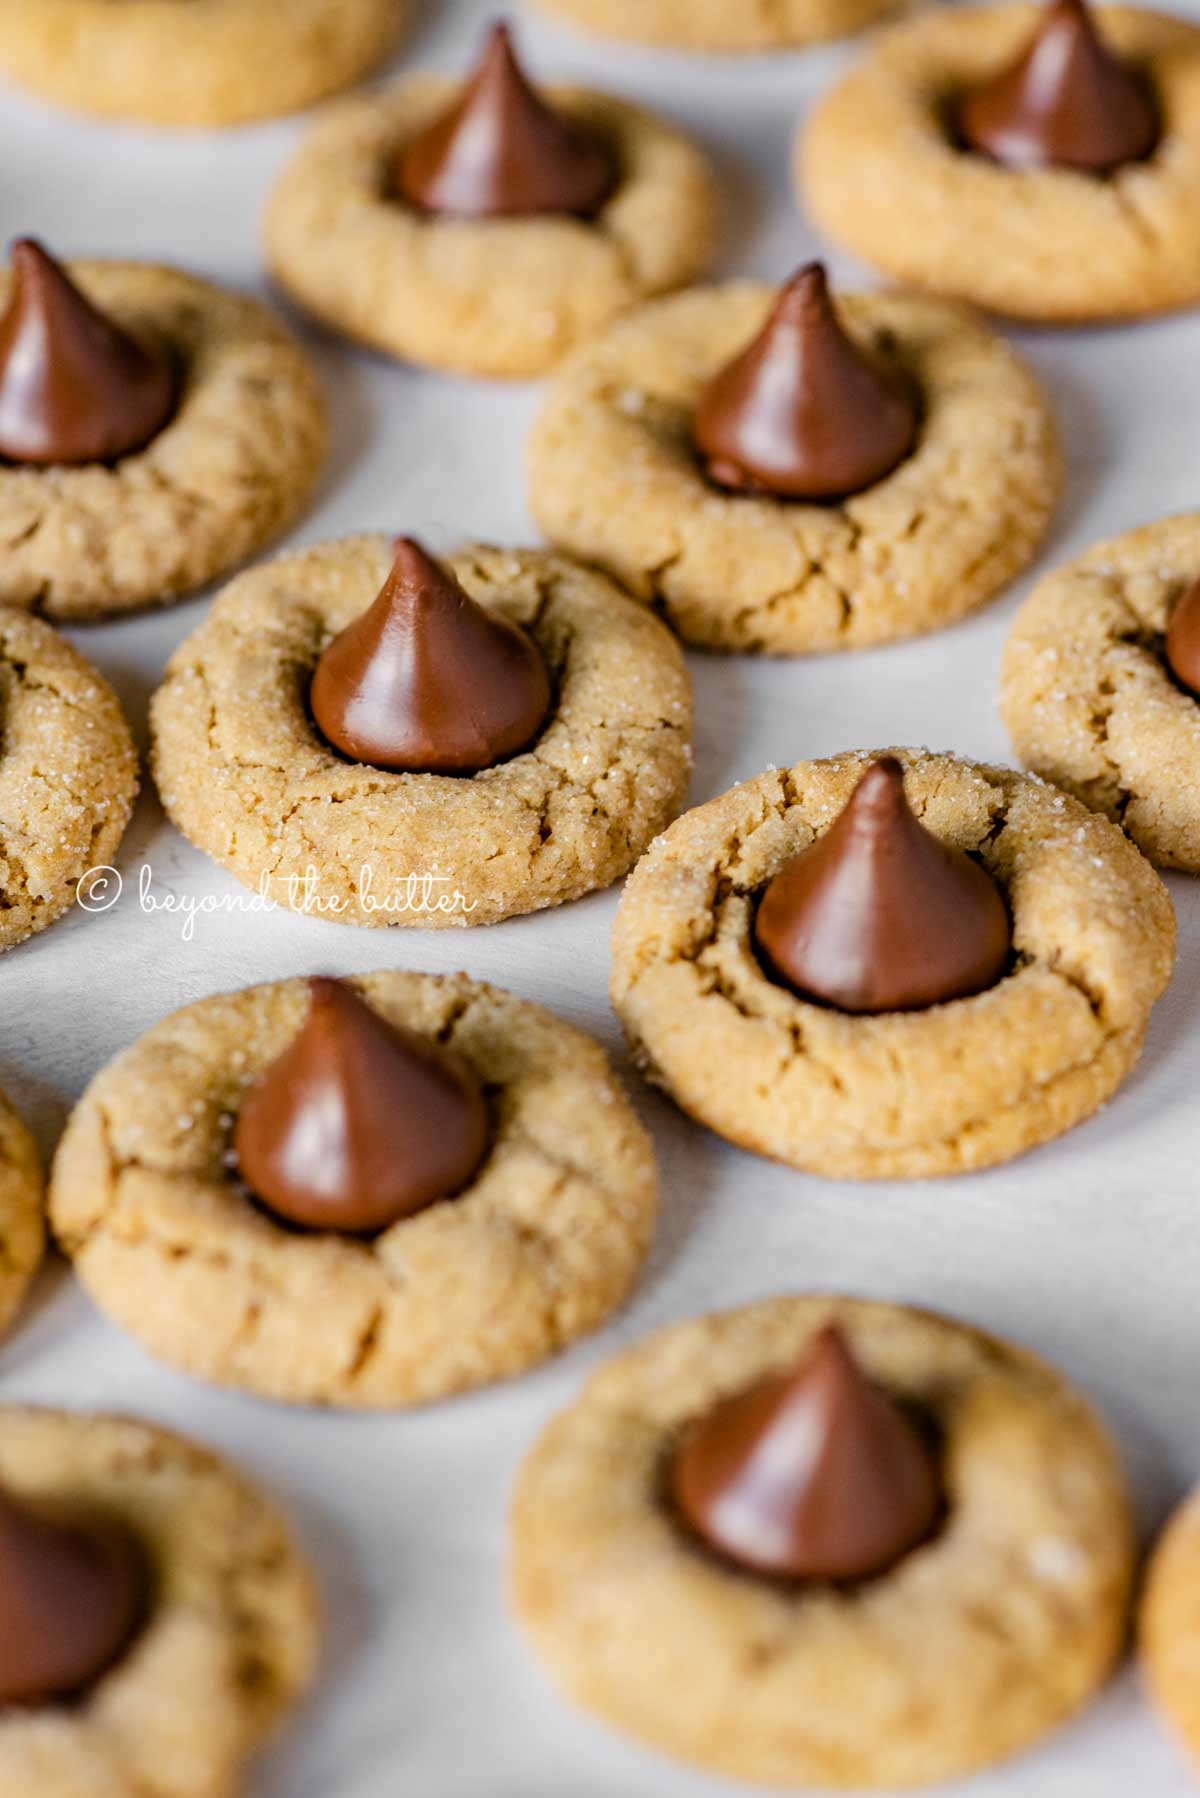 Angled image of peanut butter blossoms on parchment paper lined baking sheet | All Images © Beyond the Butter™